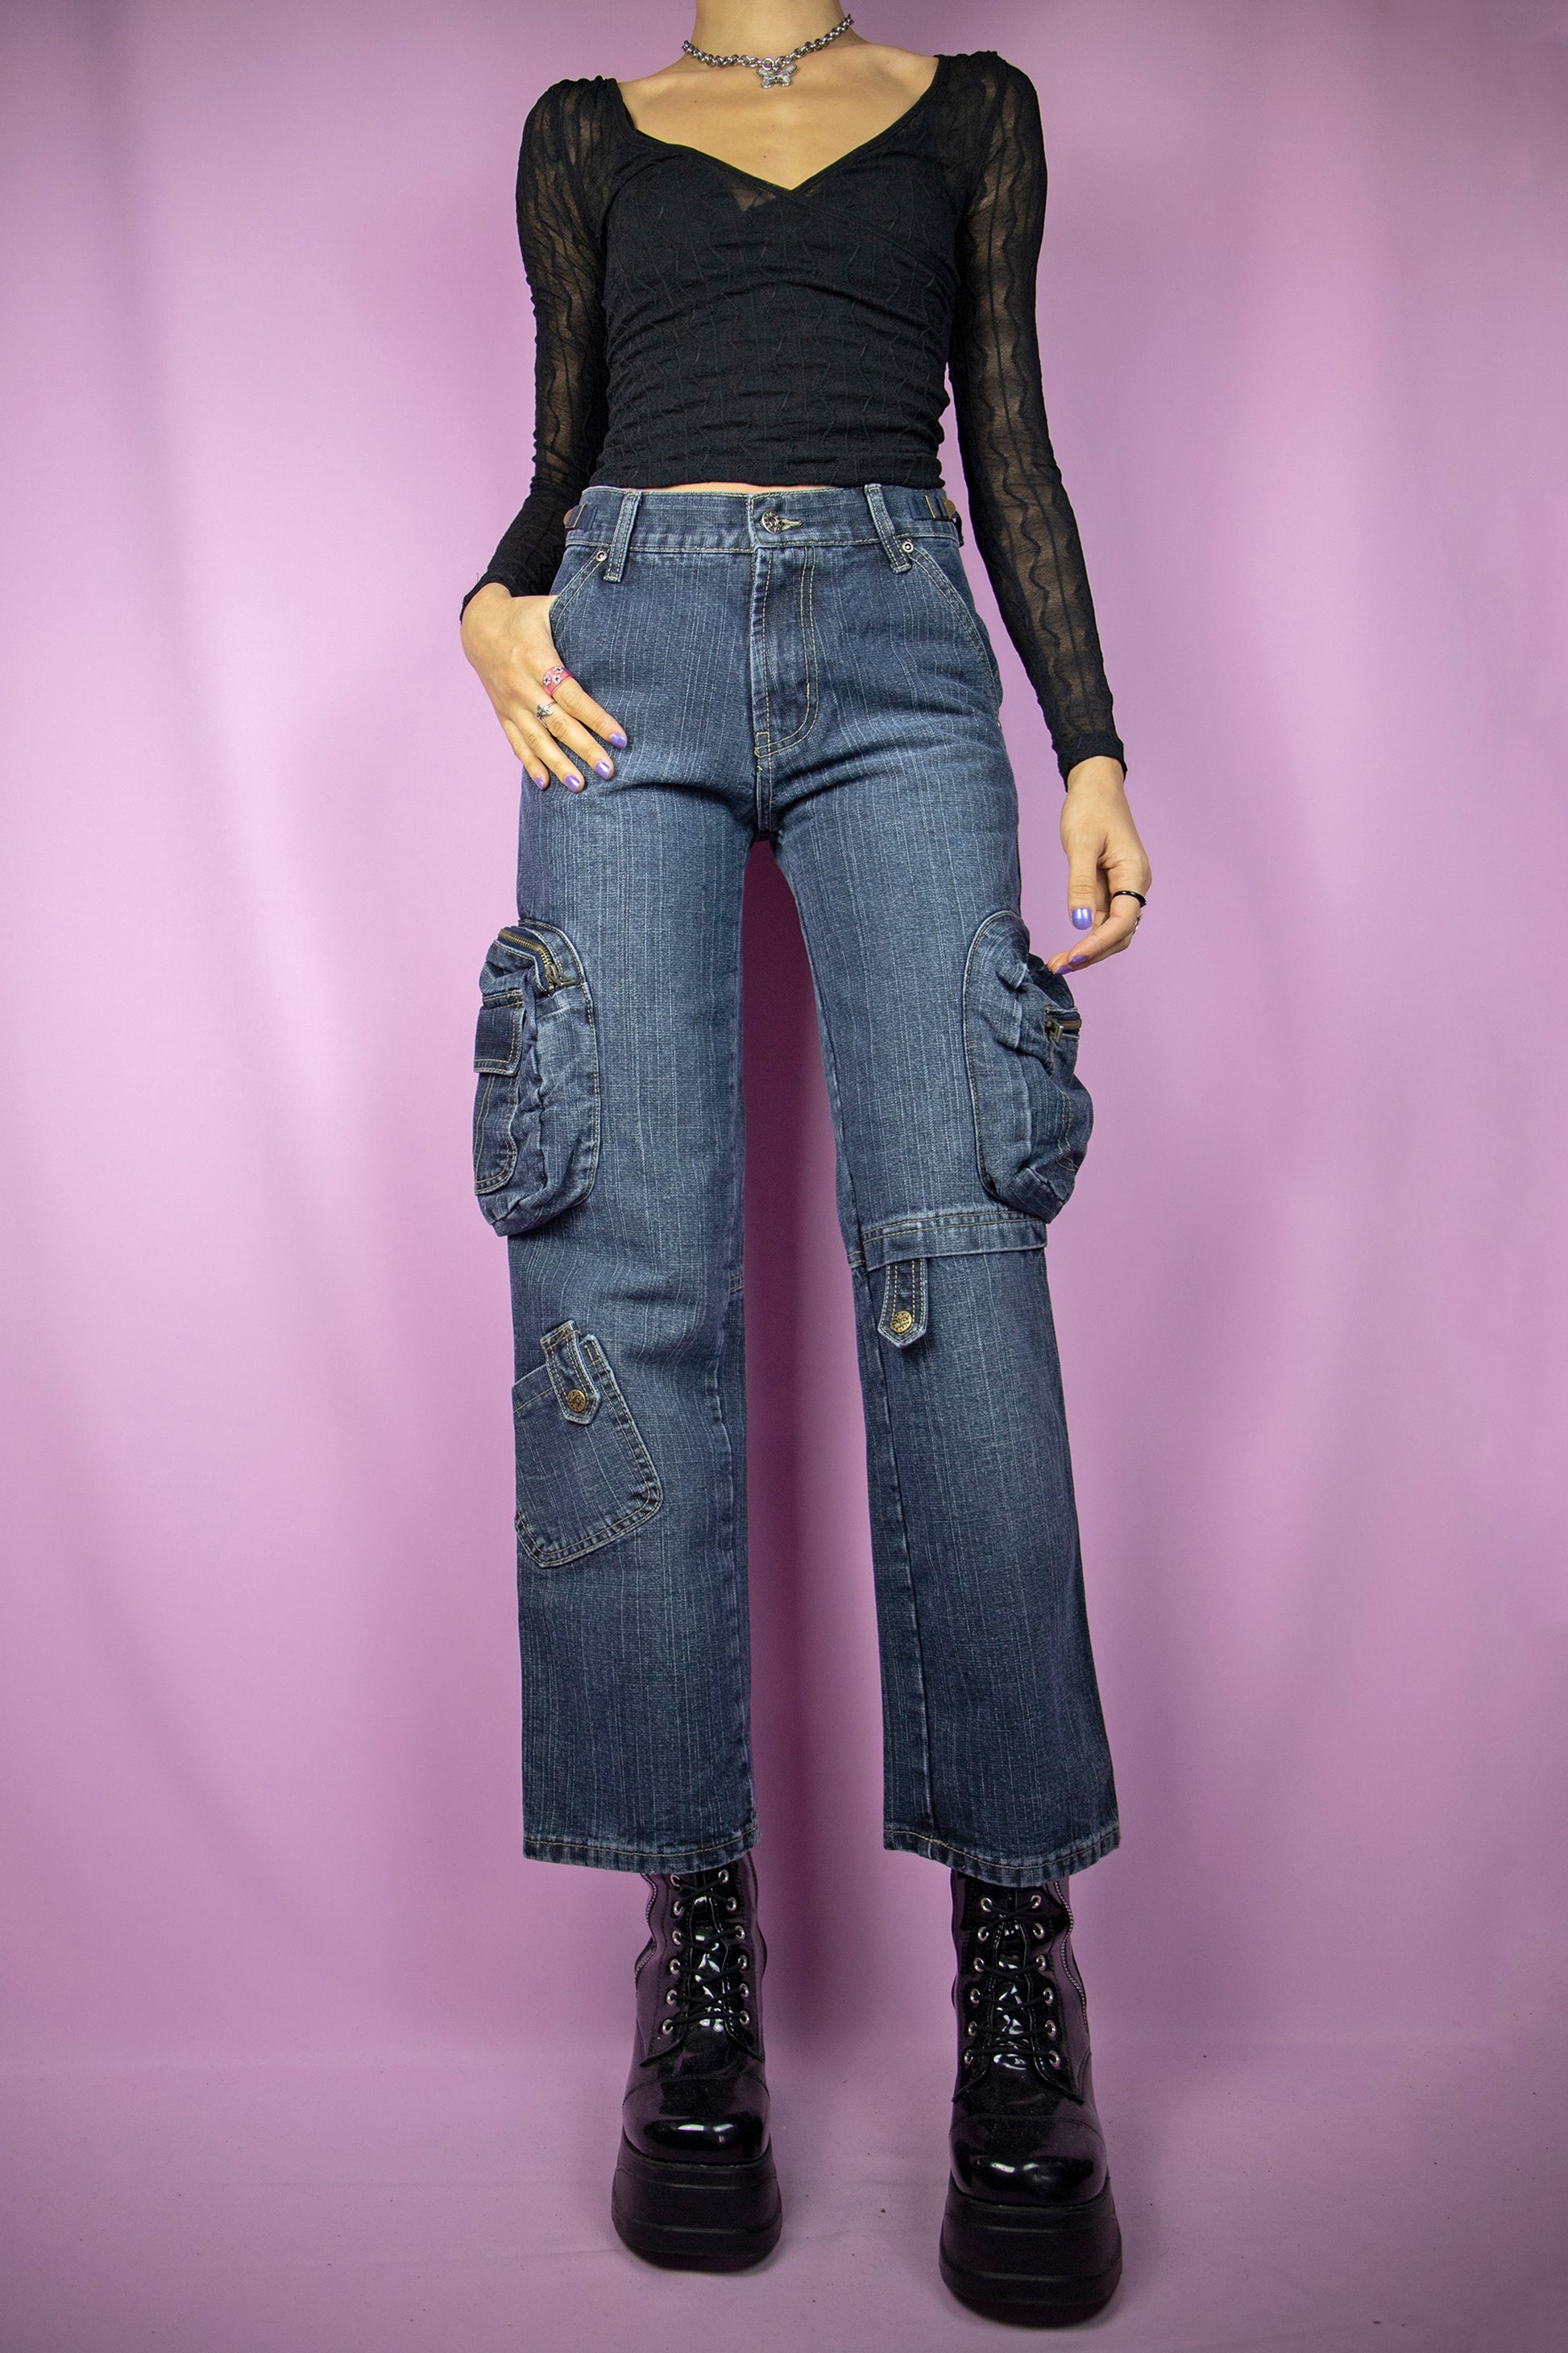 The Y2K Cargo Wide Jeans are vintage 2000s mid-rise utility dark denim pants with pockets.